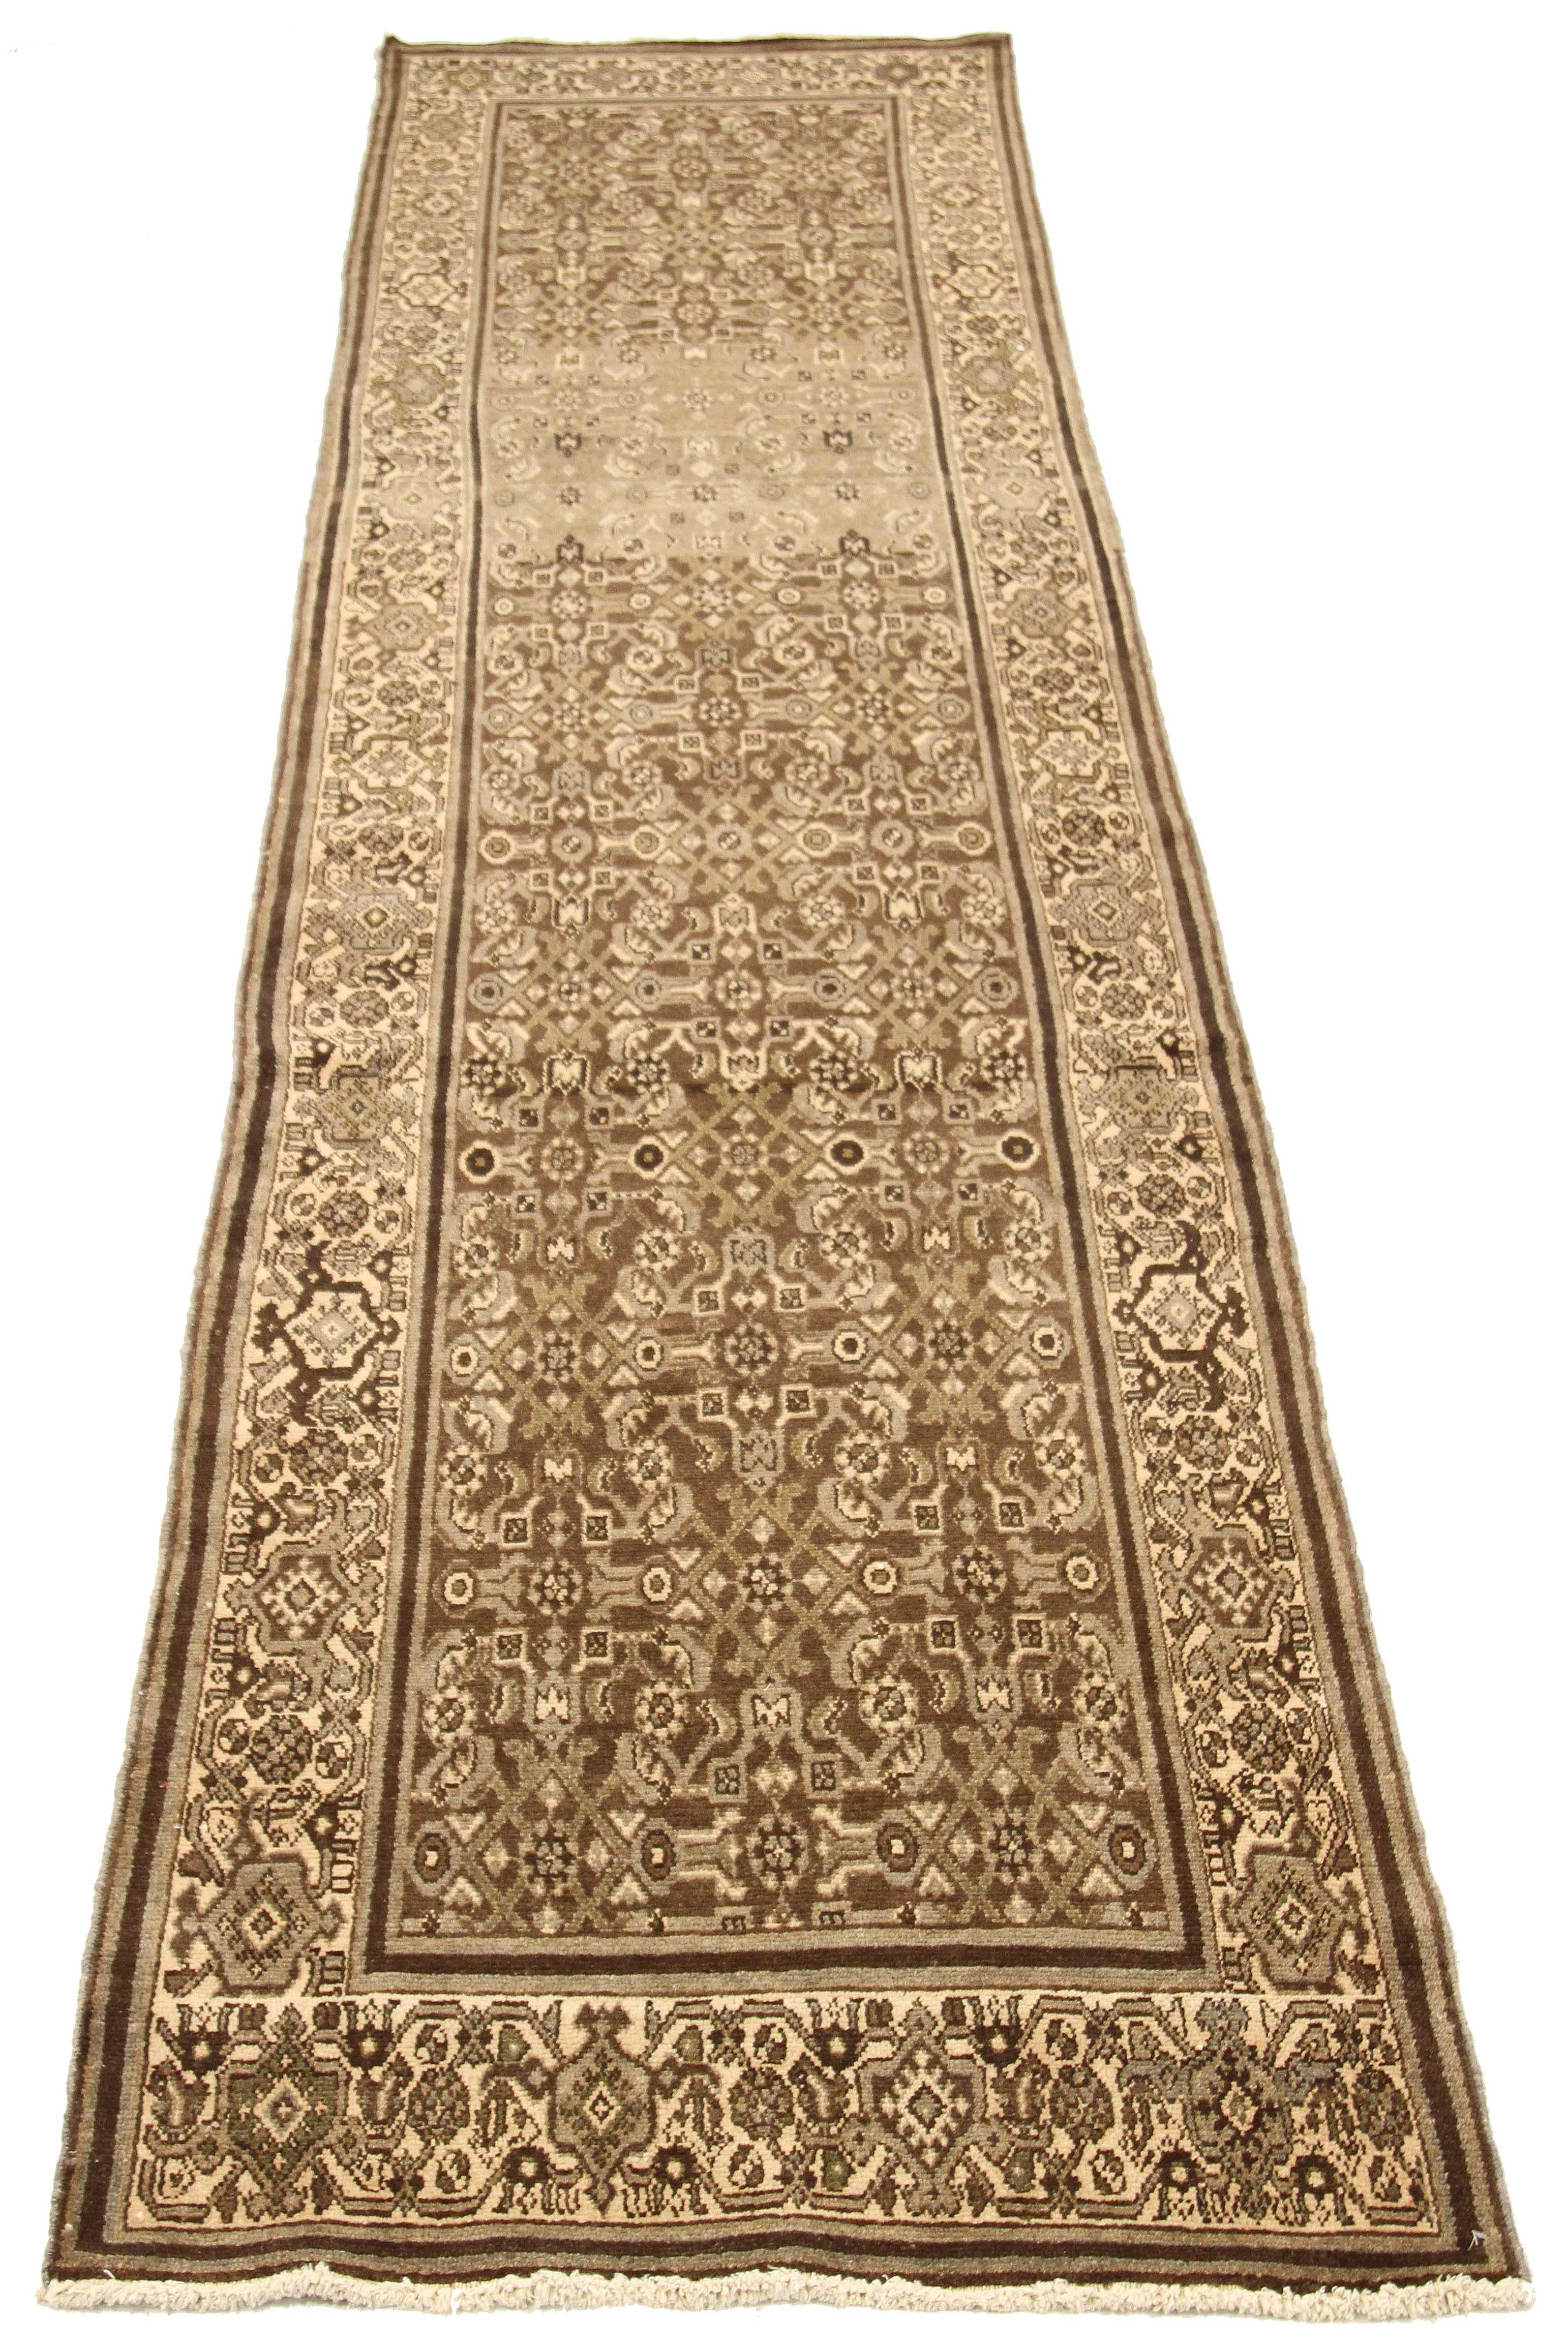 Antique Persian runner rug handwoven from the finest sheep’s wool and colored with all-natural vegetable dyes that are safe for humans and pets. It’s a traditional Malayer design featuring brown geometric patterns over an ivory field. It’s a lovely